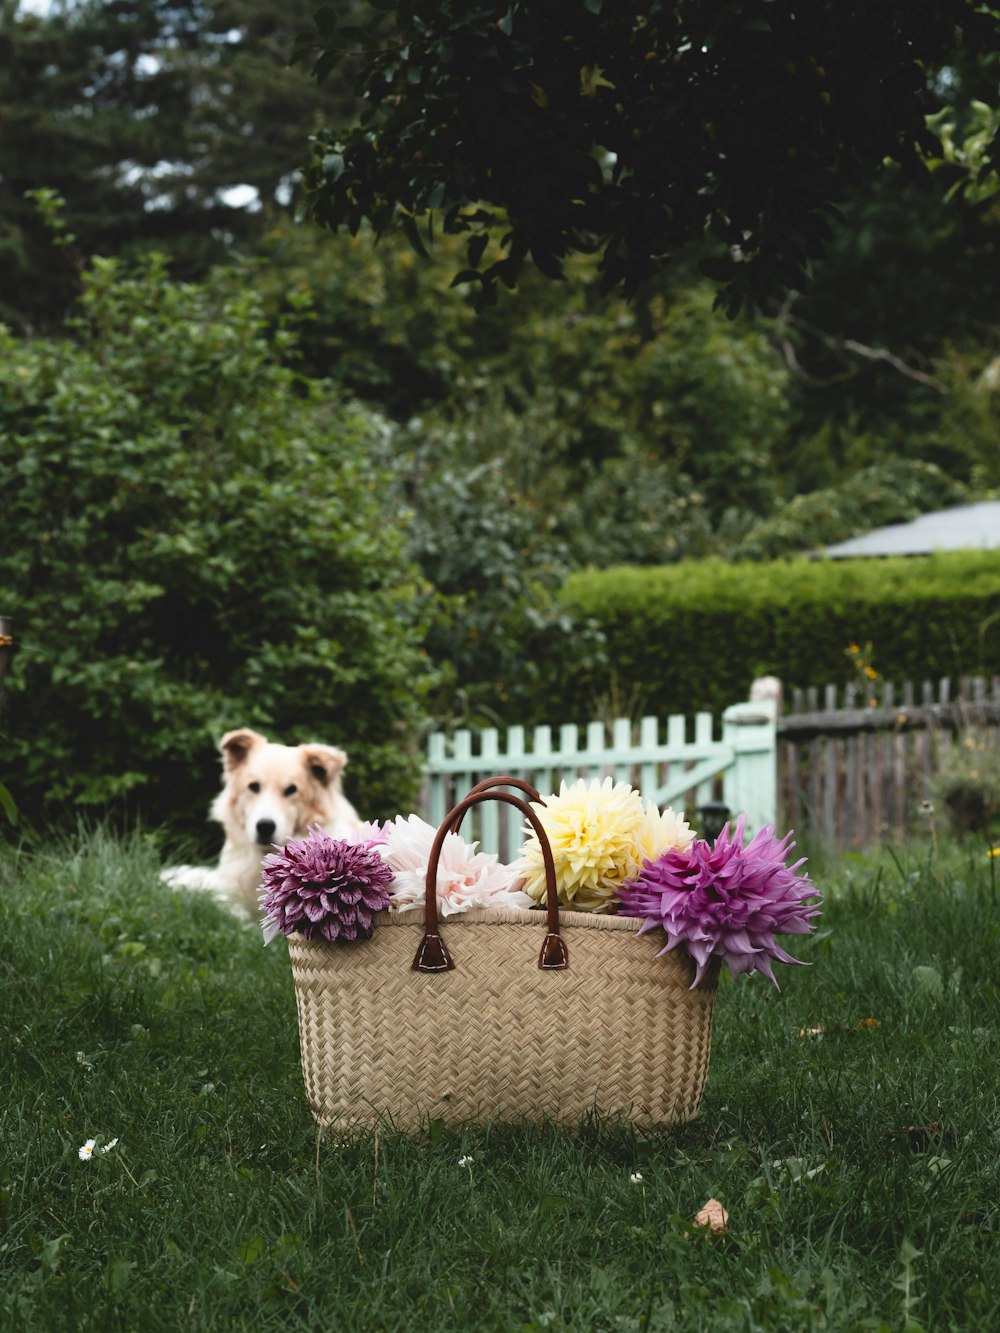 a dog sitting in the grass next to a basket with flowers